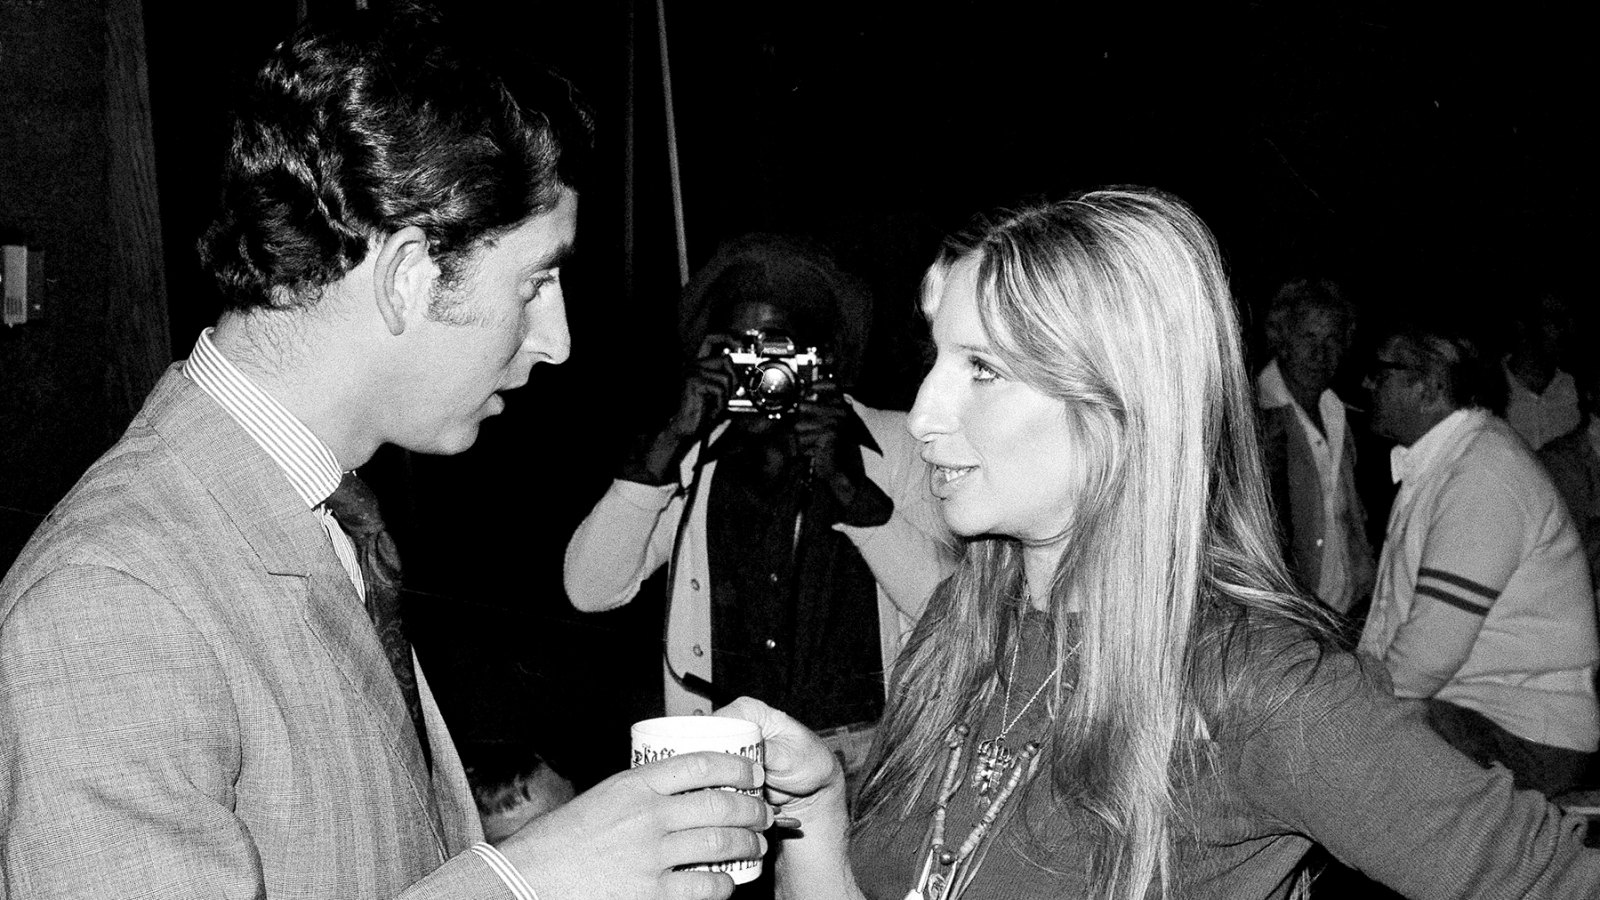 Barbra Streisand offers a cup of coffee to Prince Charles of Great Britain as they chat on a set at Warner Bros. studio in Los Angeles, CA, March. 19, 1974.